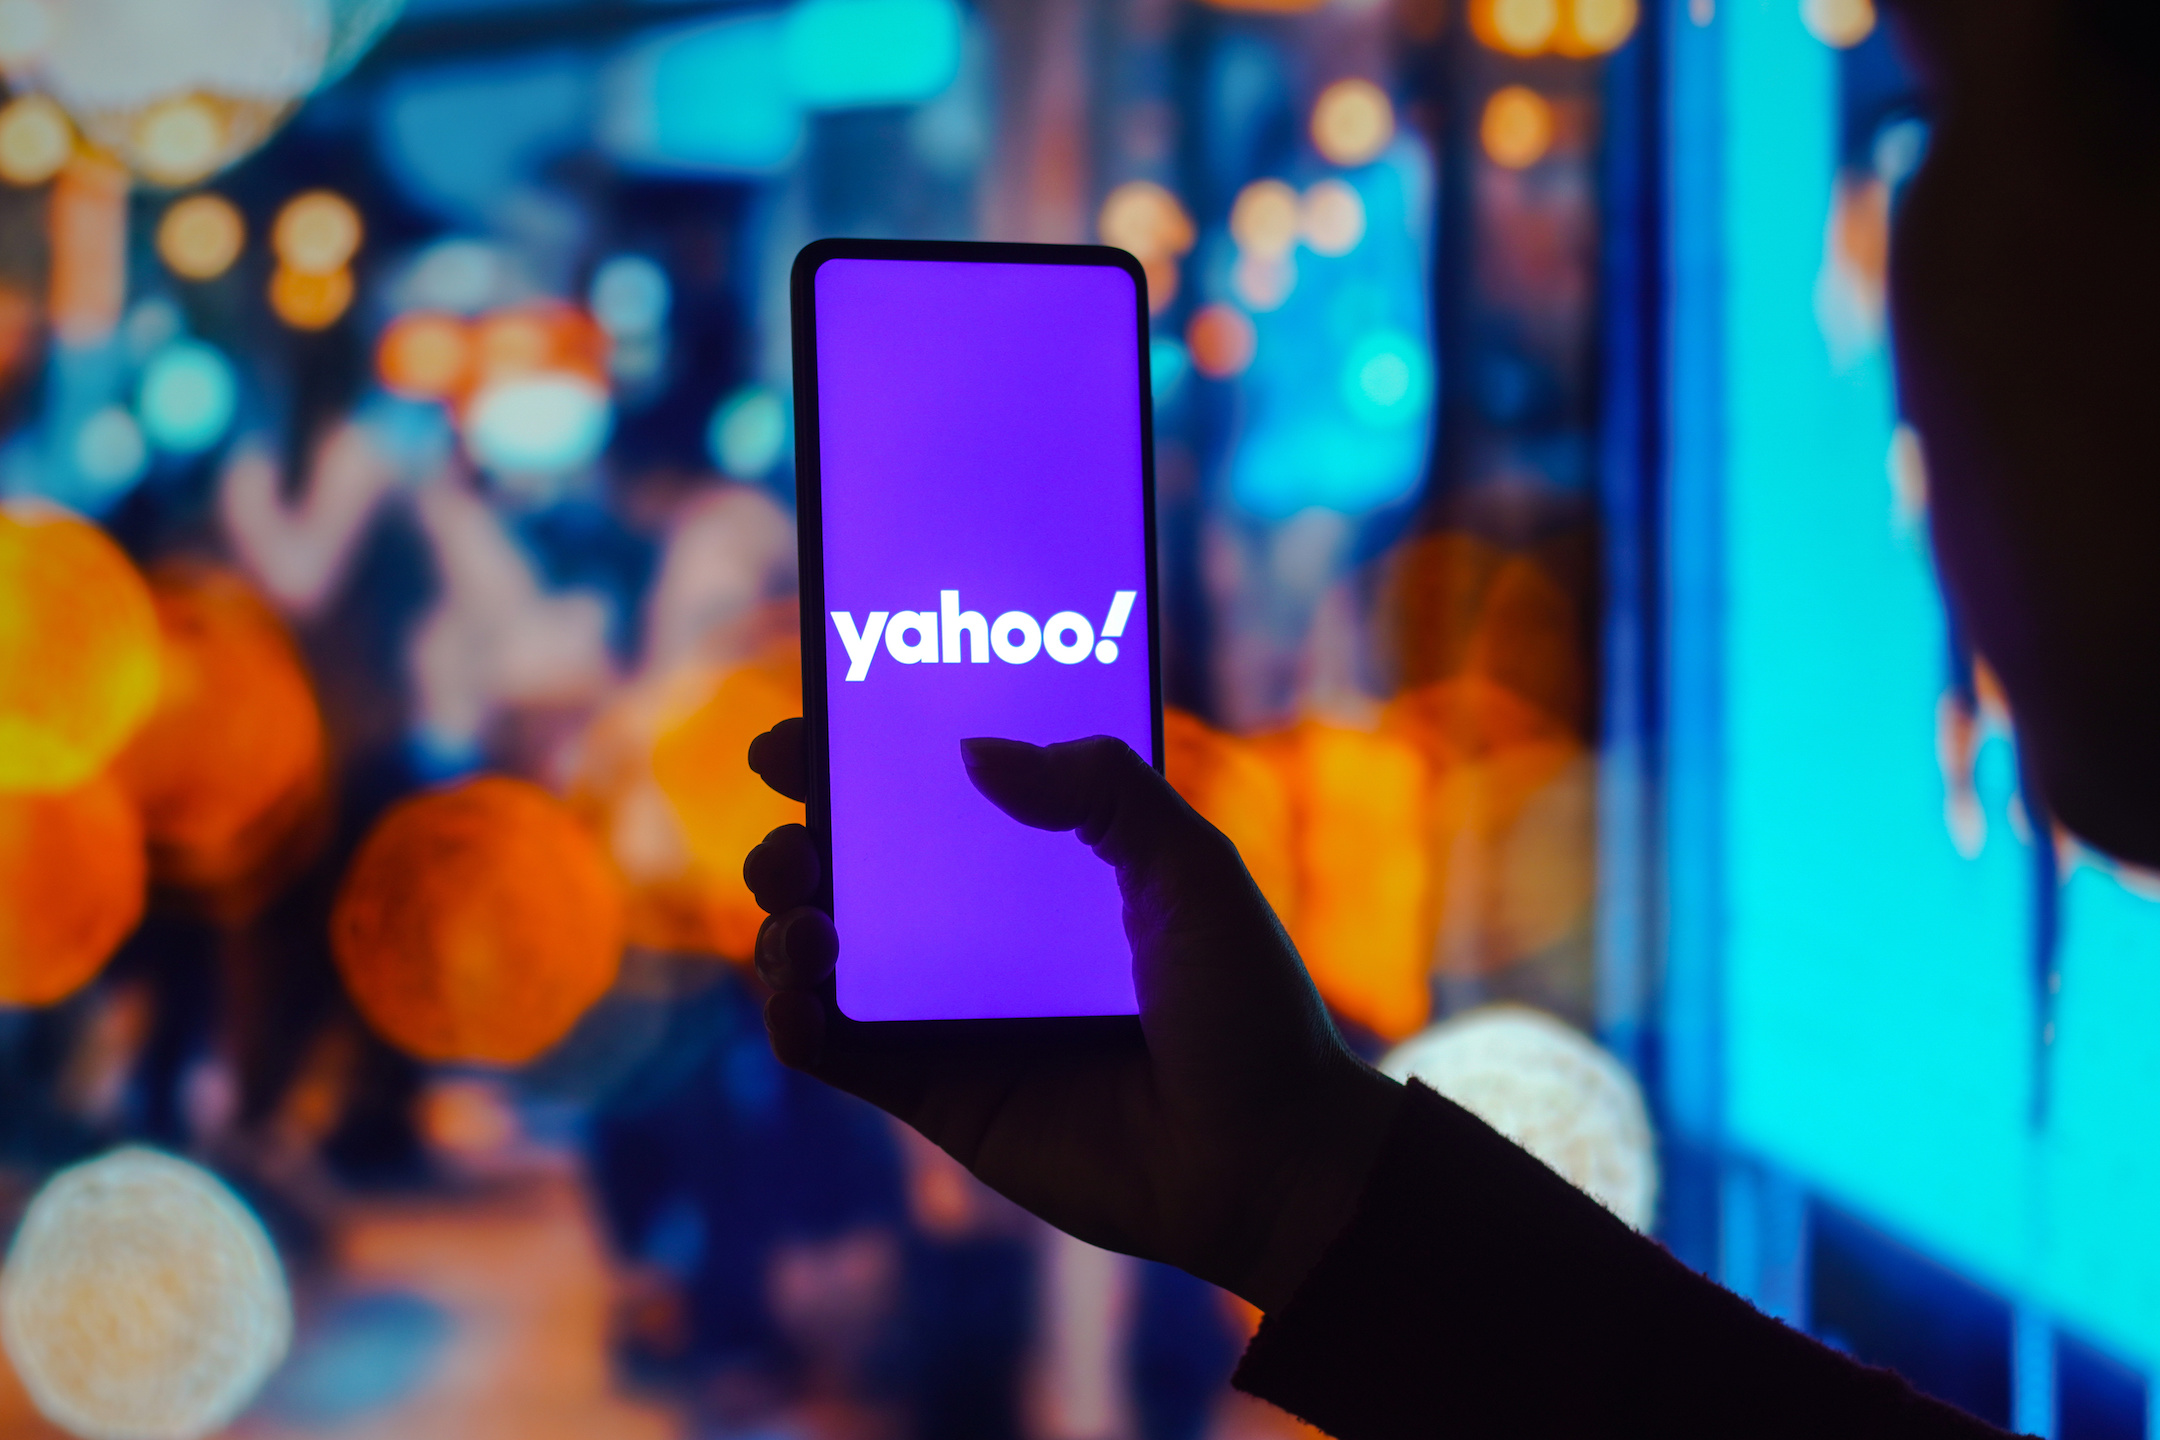 Yahoo Mail introduces new AI-powered capabilities, including a